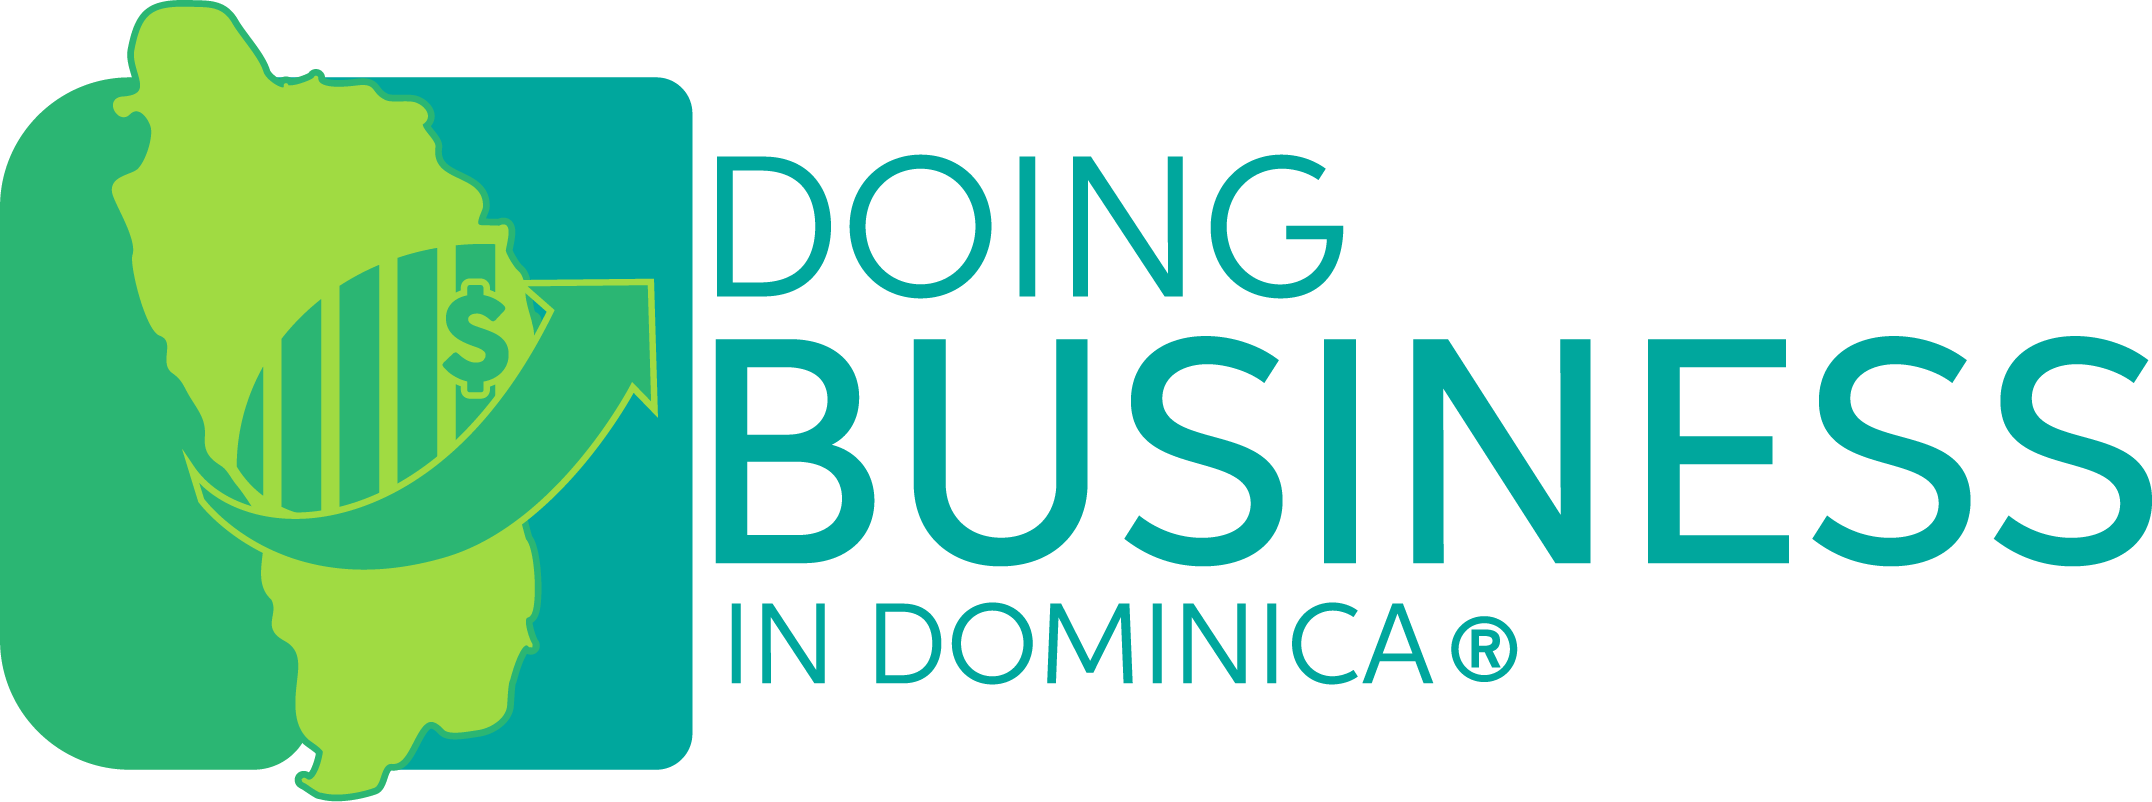 Doing Business in Dominica